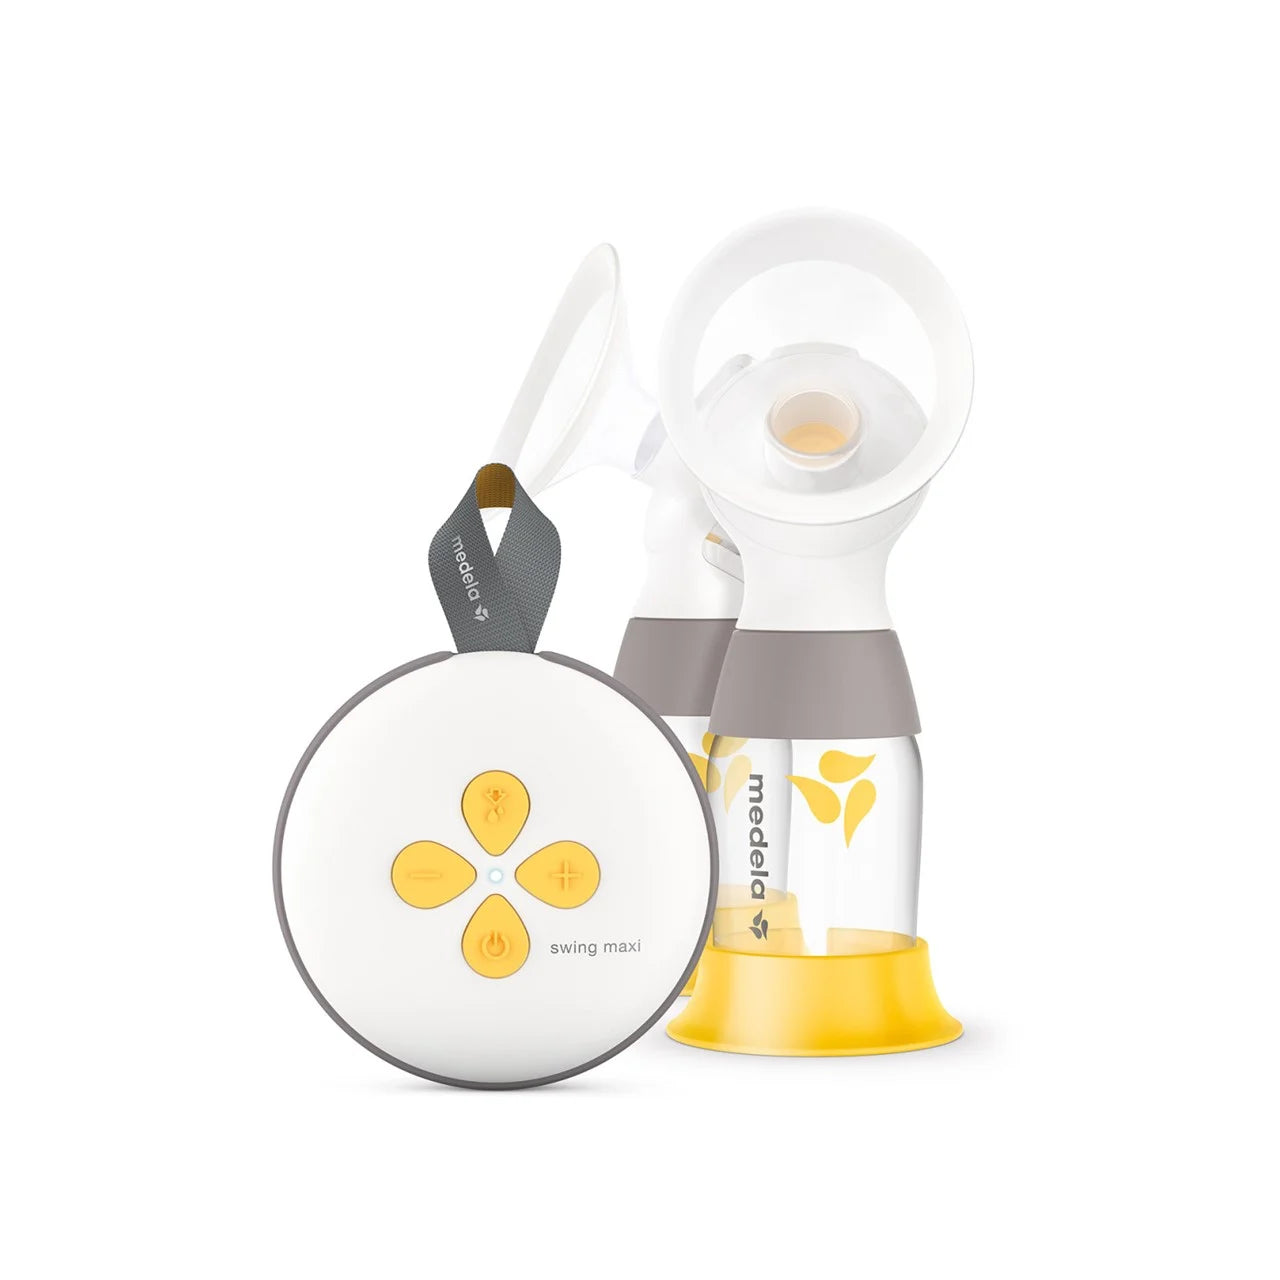 Swing Maxi Double Electric Breast Pump by Medela